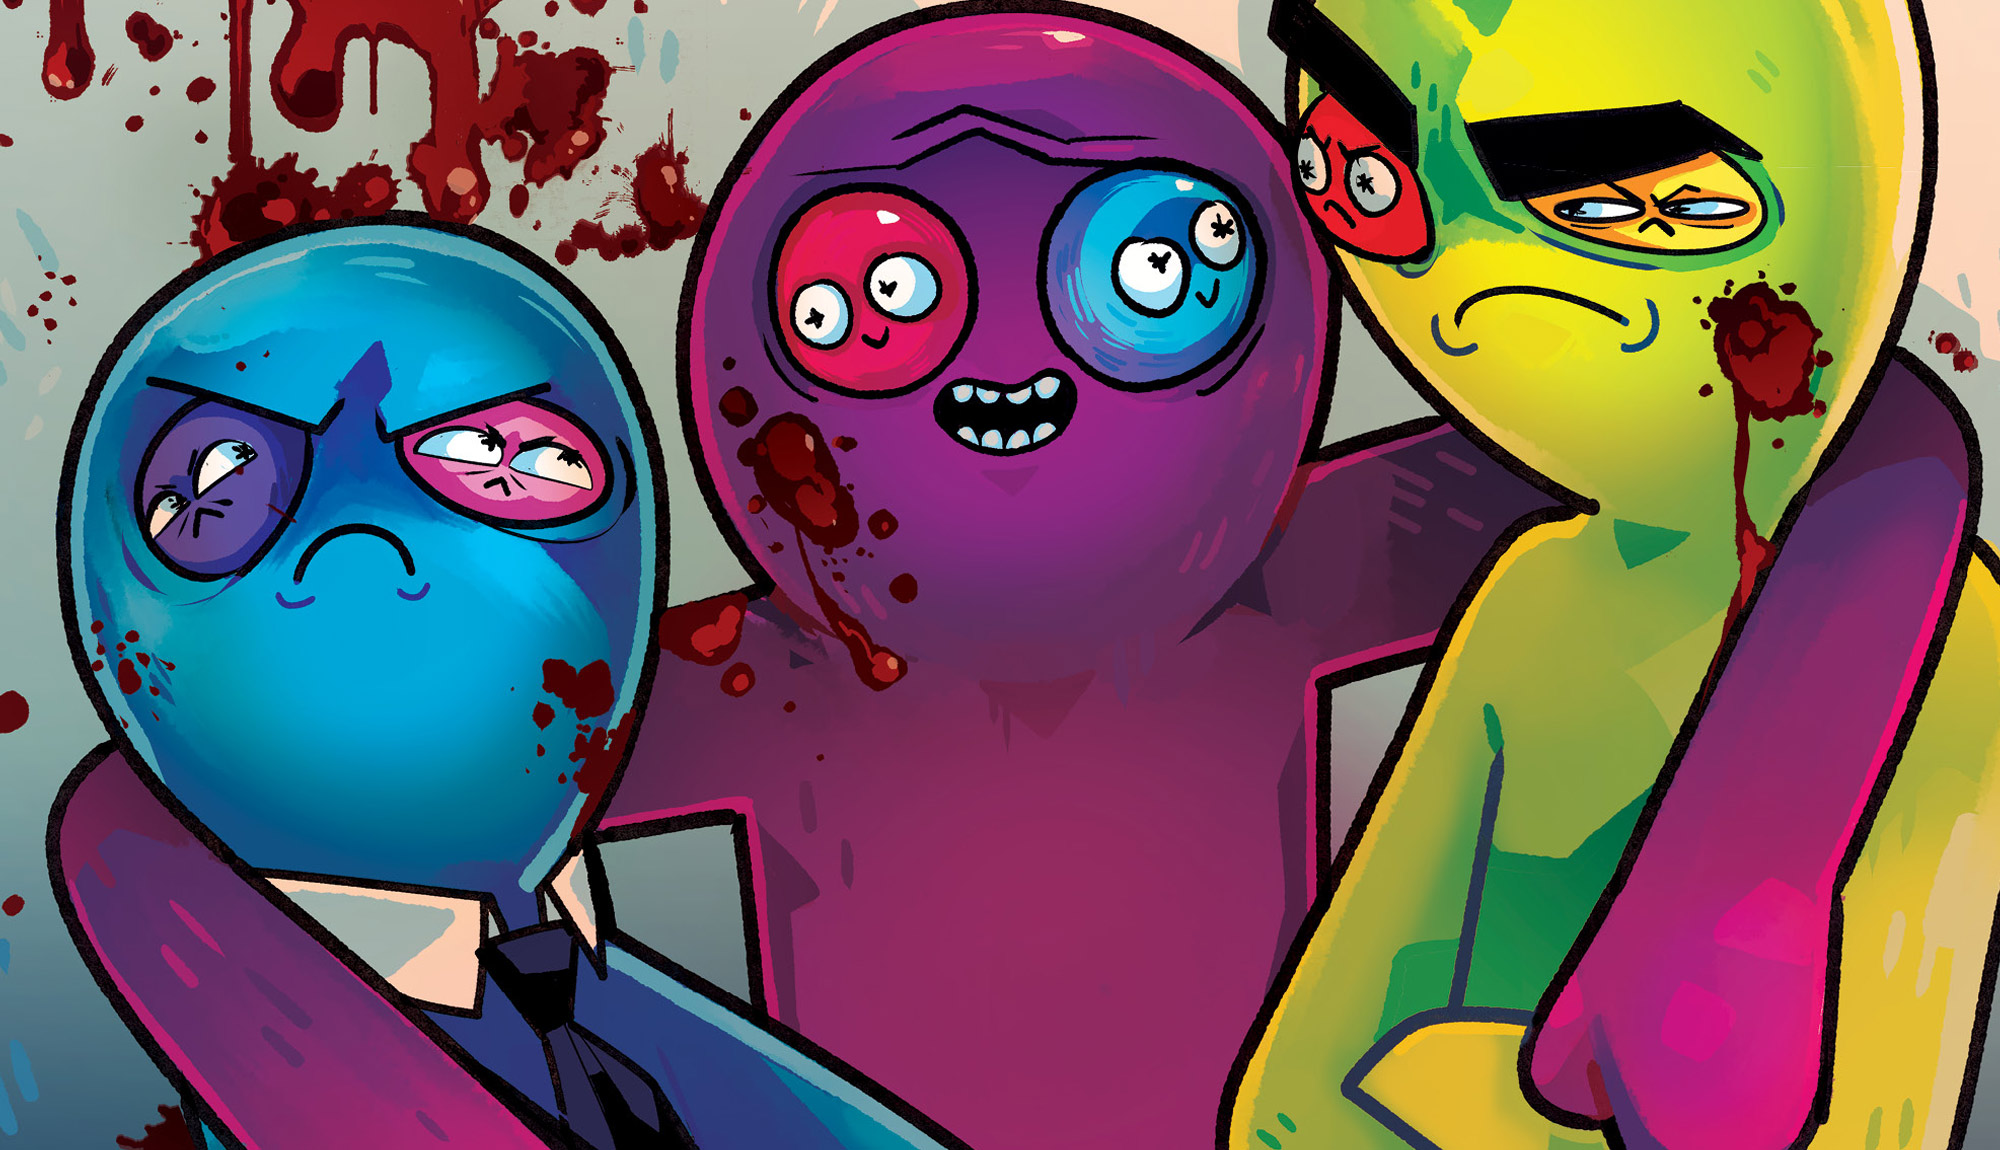 Justin Roiland’s TROVER SAVES THE UNIVERSE Makes Its Comic Book Debut!